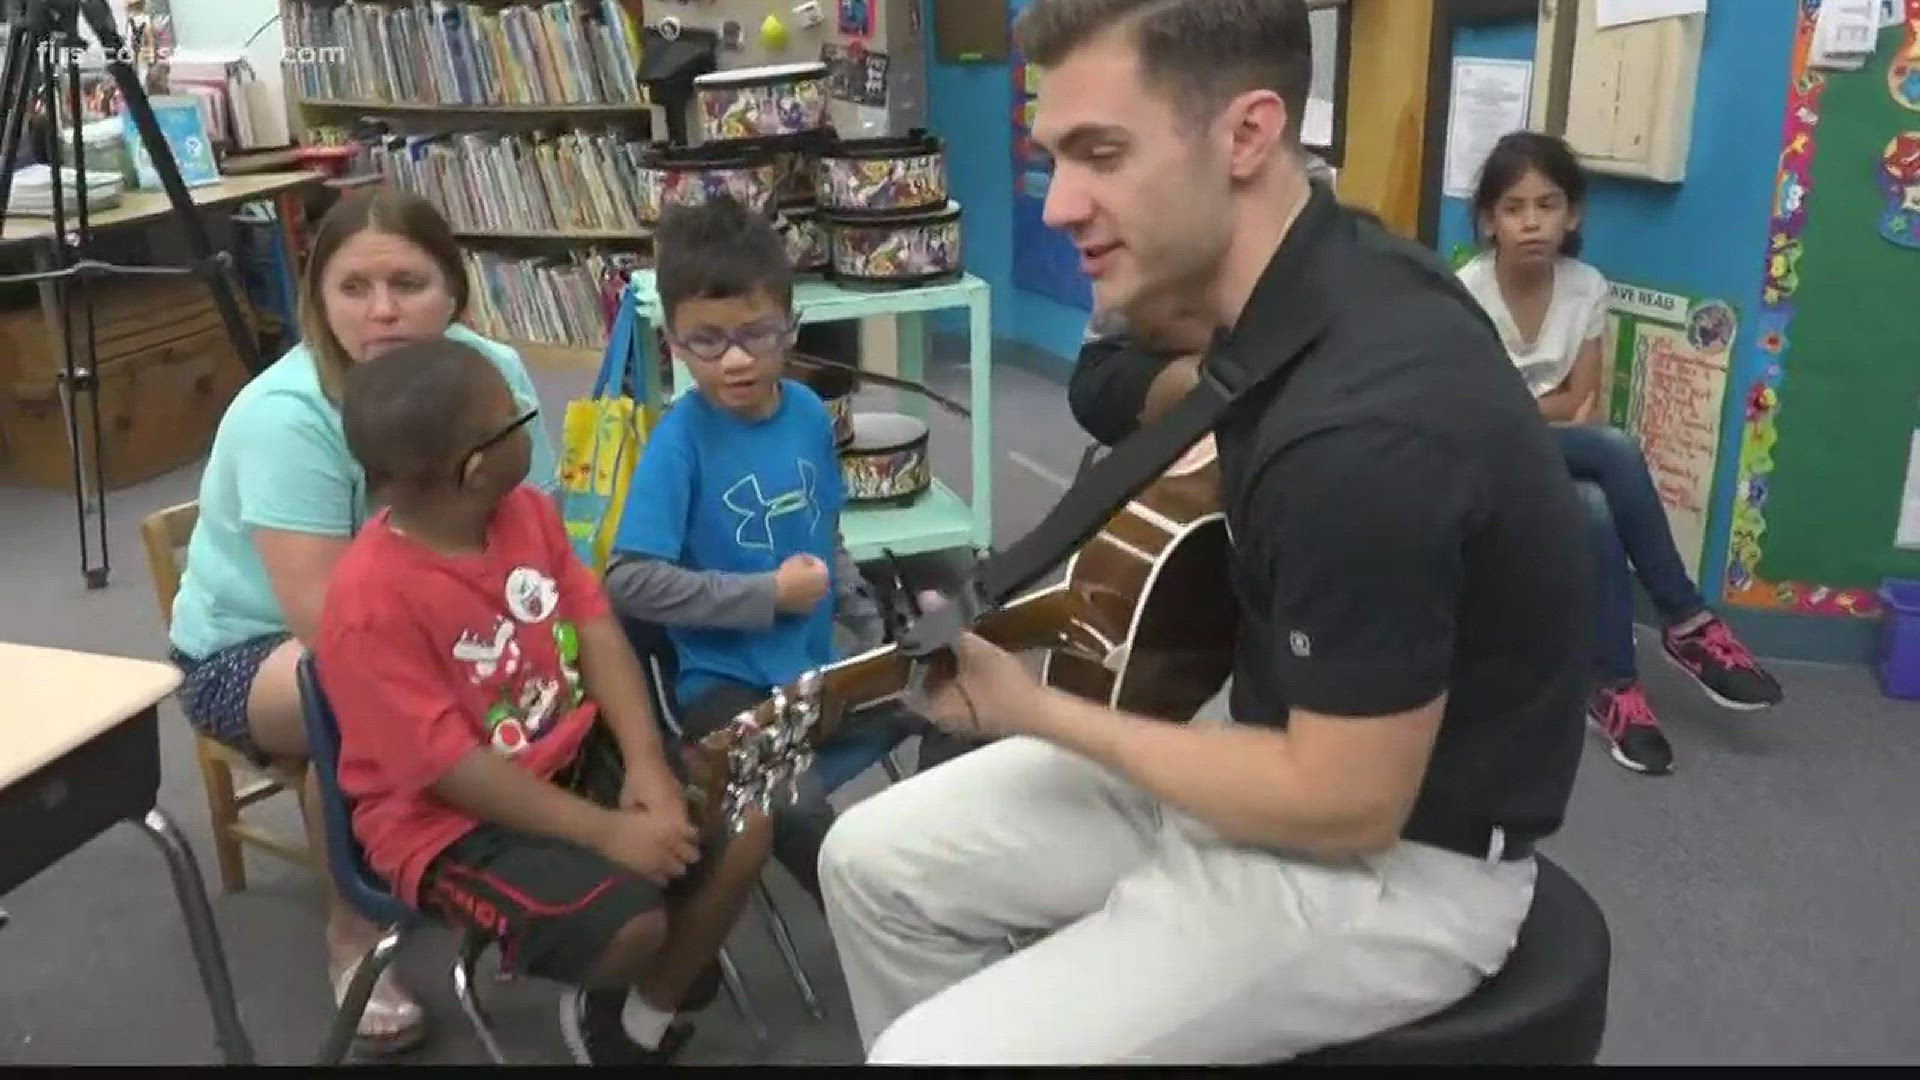 Students with special needs are able to connect with others through a music therapy program in Neptune Beach.